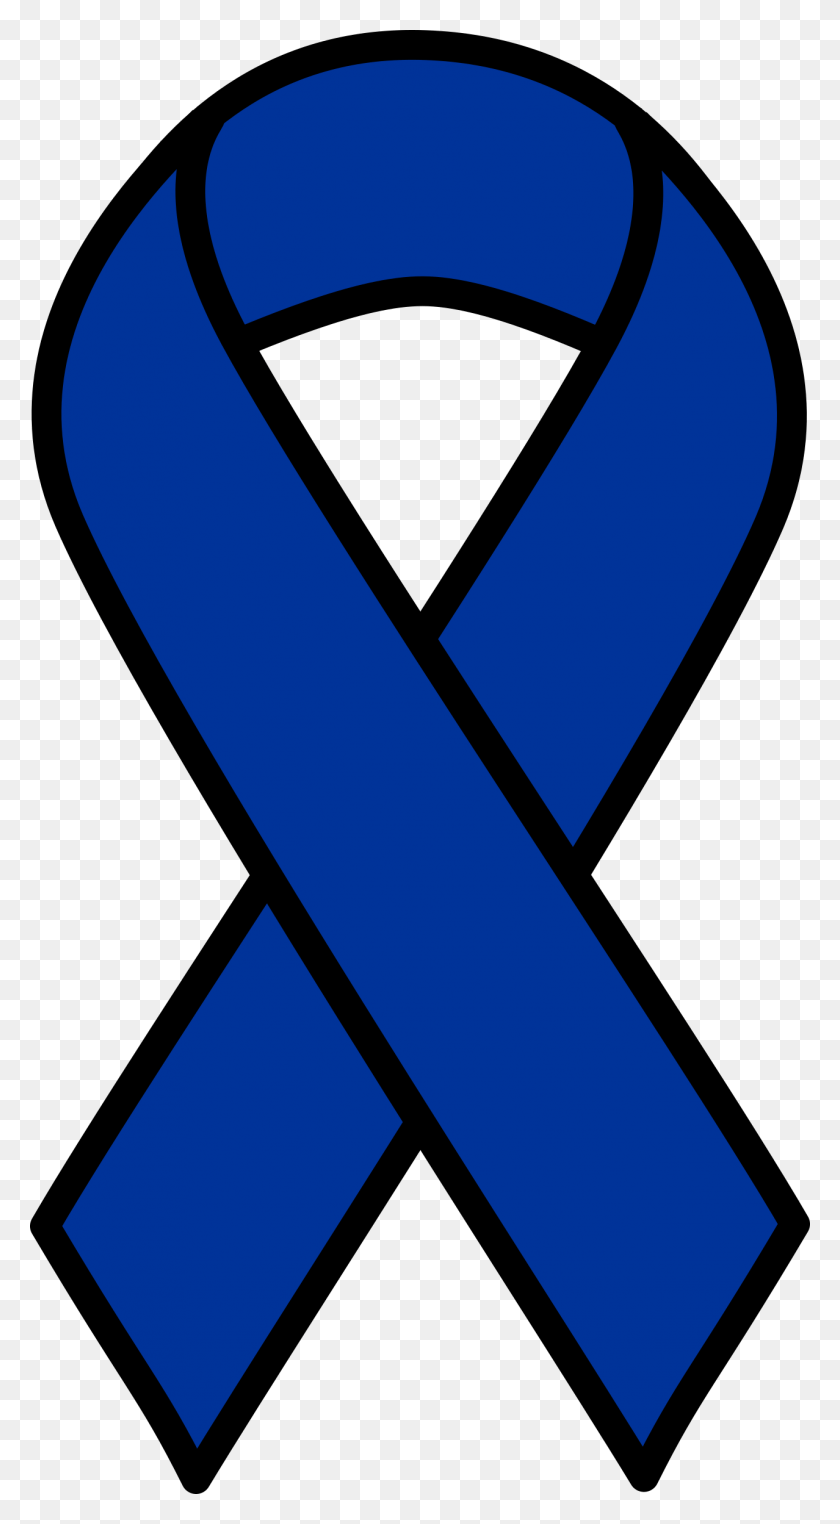 Collection Of Blue Ribbon Clipart Black And White Colon Cancer Ribbon